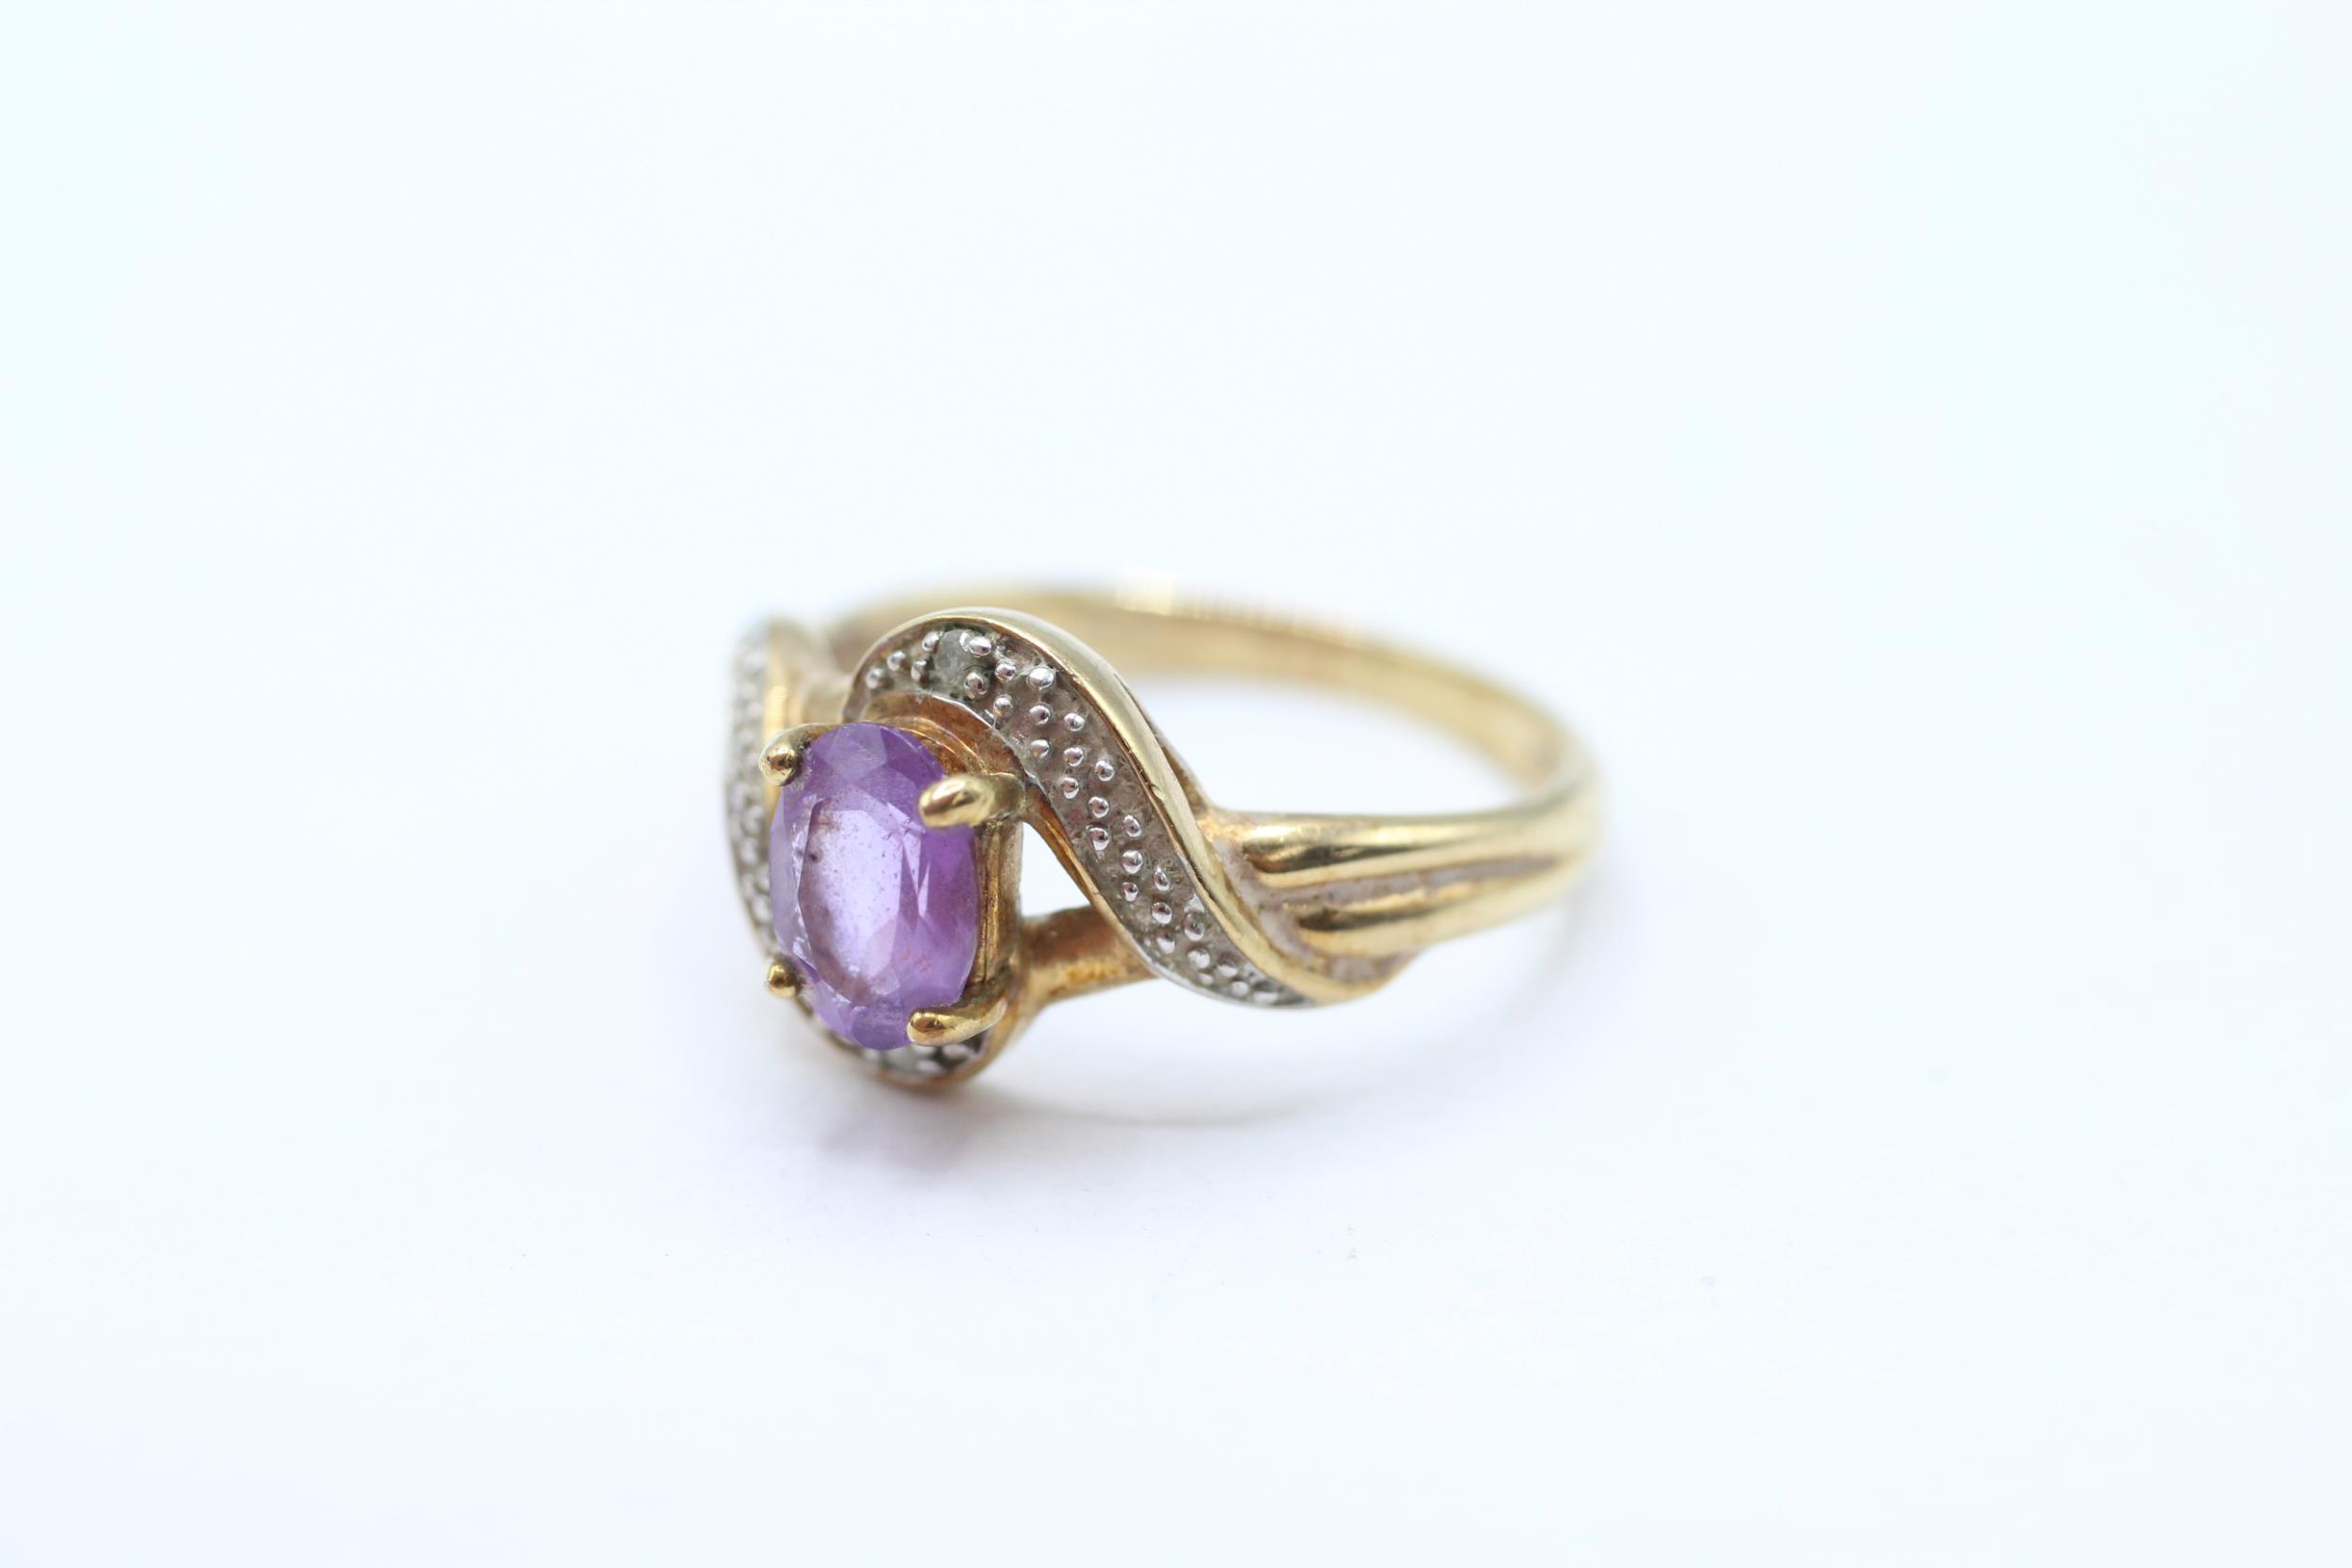 9ct gold amethyst single stone twist ring with diamond accent Size M 2.3 g - Image 3 of 4